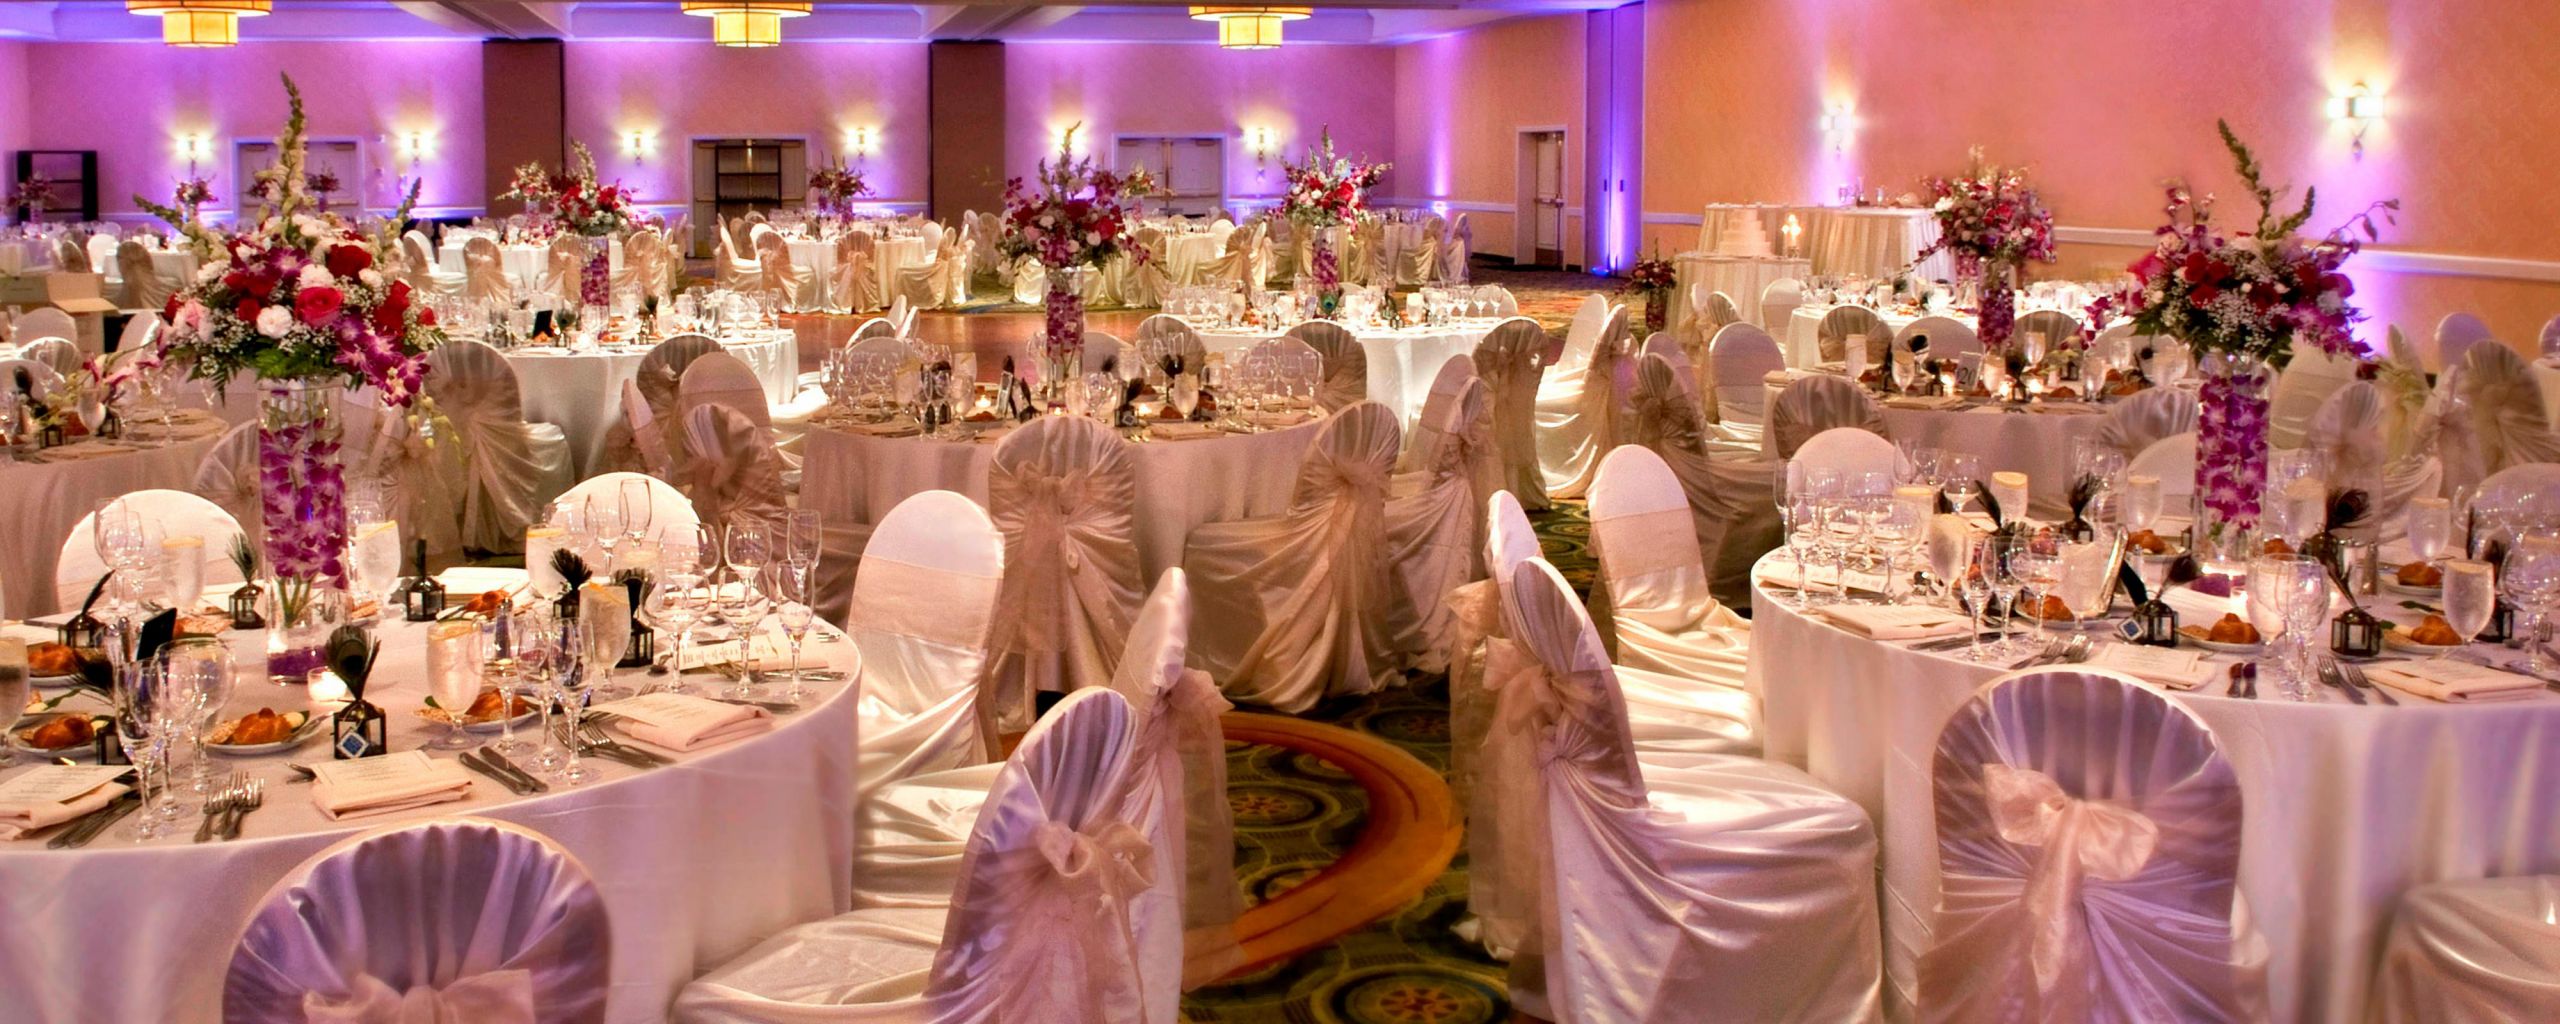 Westchester Wedding Venues
 Wedding Venues in Tarrytown Westchester County NY